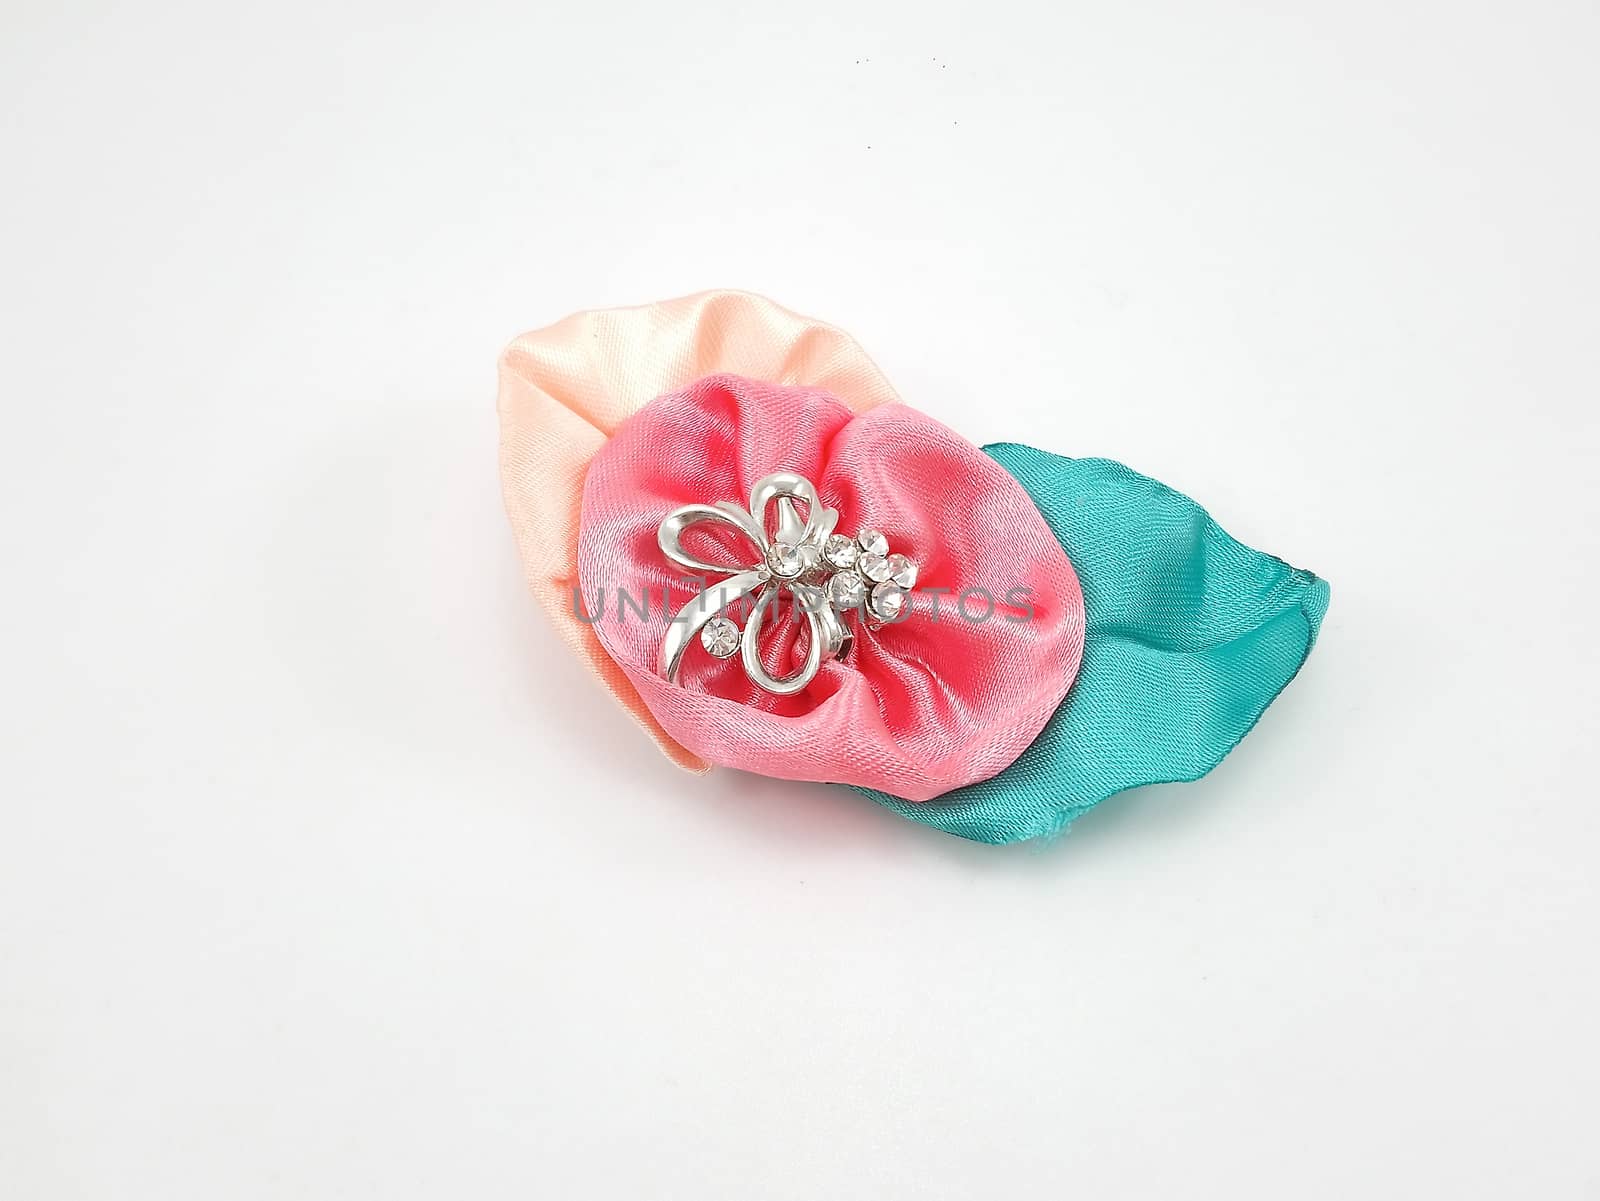 Floral fabric with metal ribbon brooch by imwaltersy